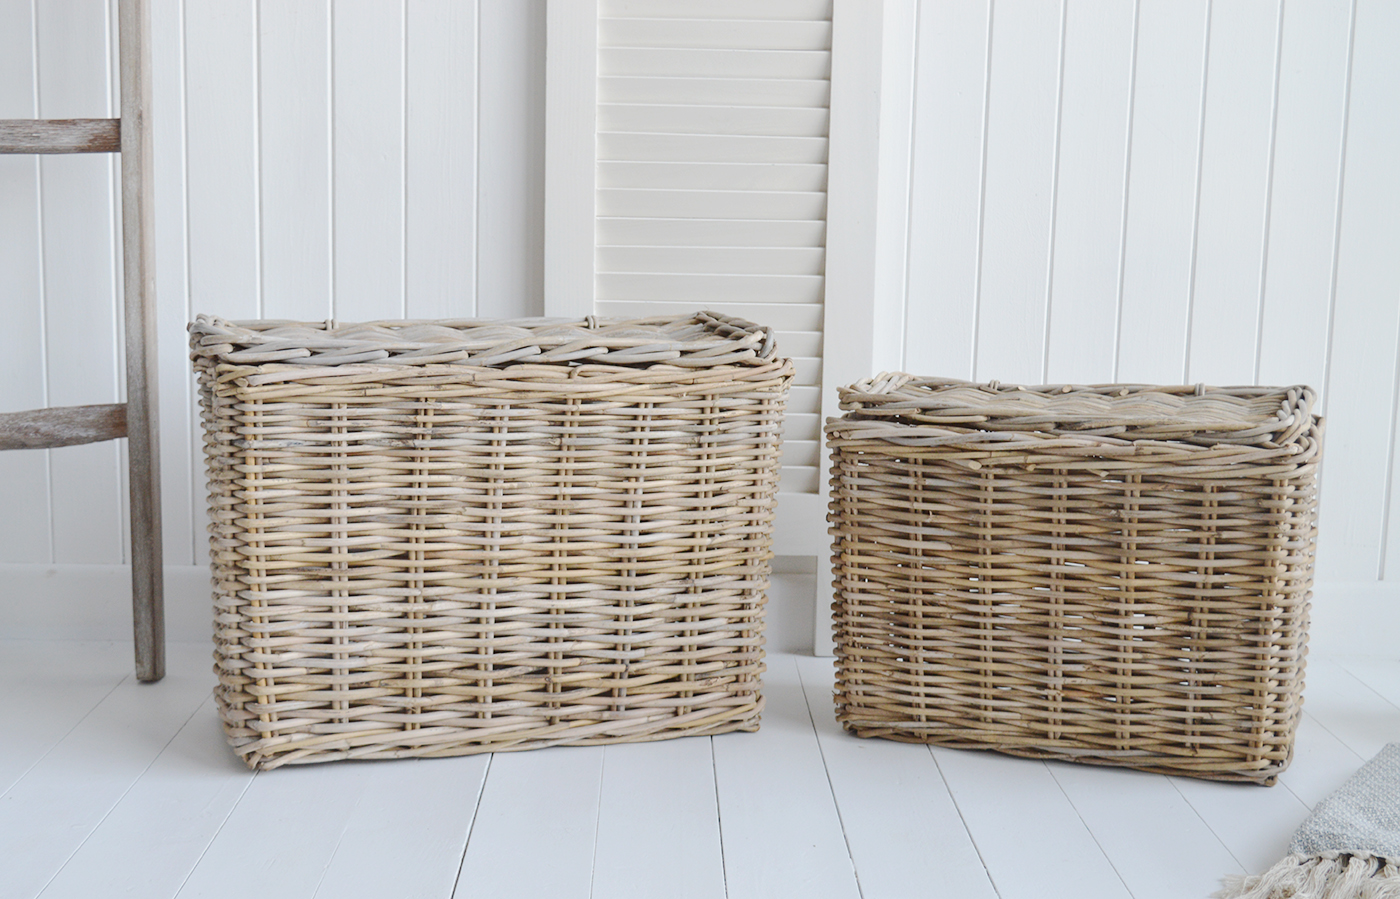 Casco Bay Grey basketware Willow slim basket hampers for logs, toys and everyday storage from The White Lighthouse Furniture and Home Interiors for New England, country, coastal and city homes for hallway, living room, bedroom and bathroom